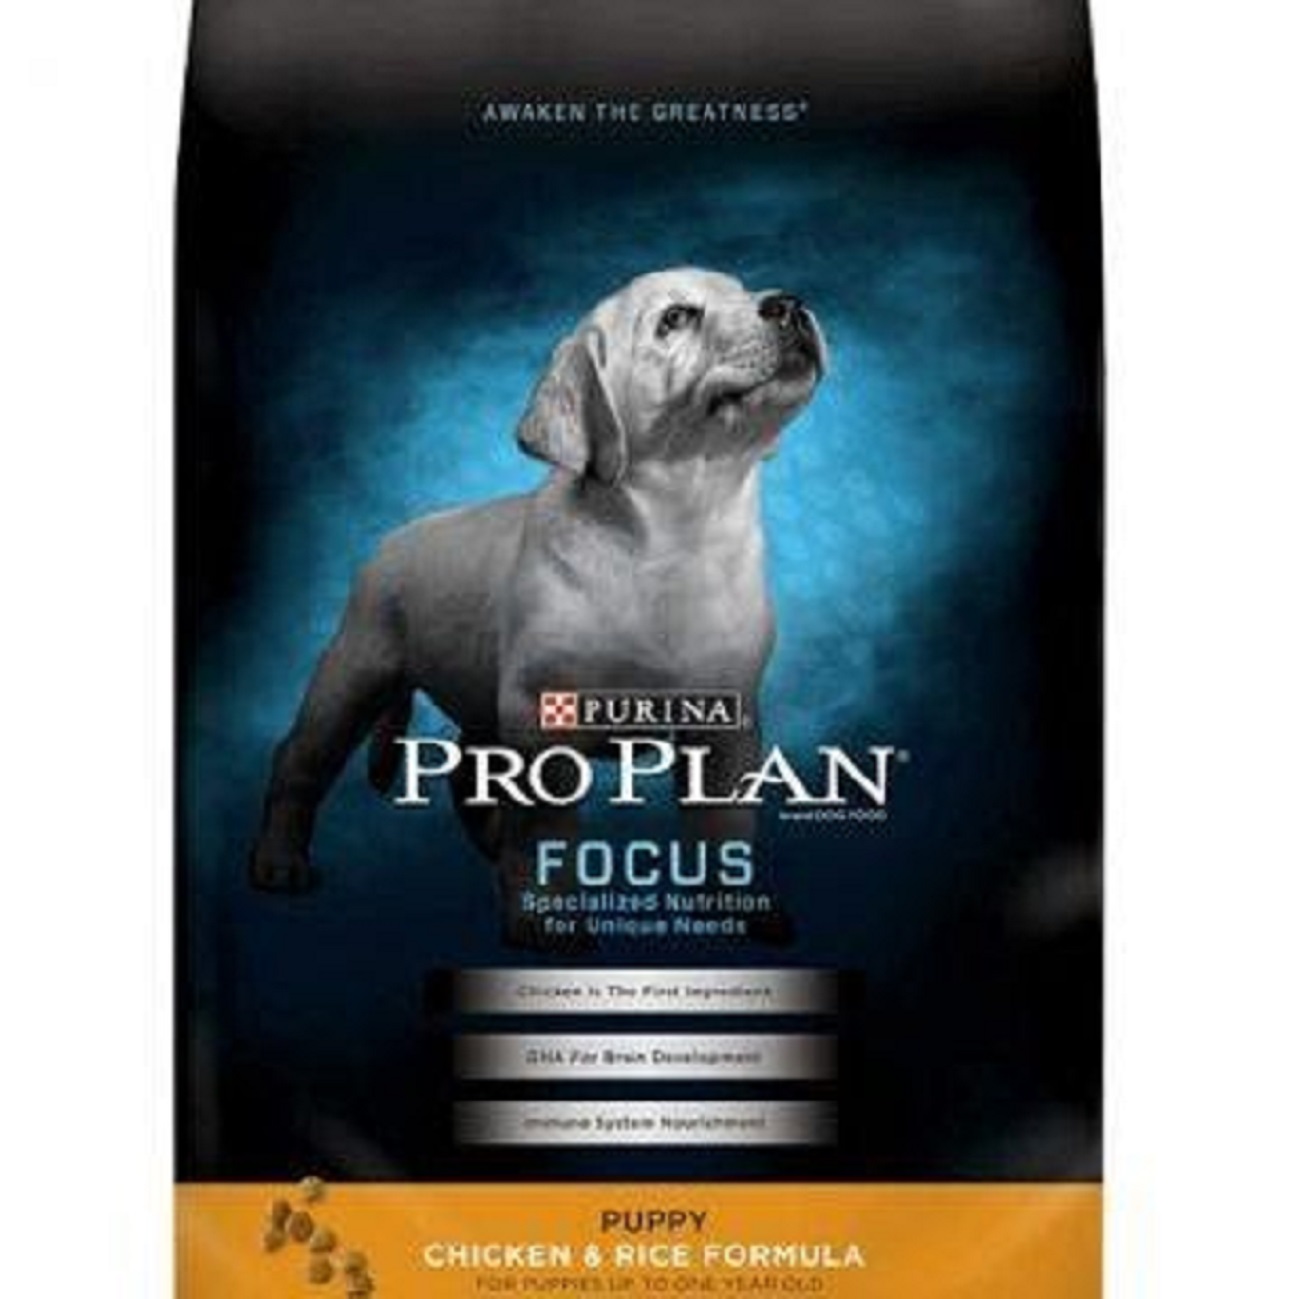 Purina Pro Plan dry kibble food for brain and vision development, as well as weight management